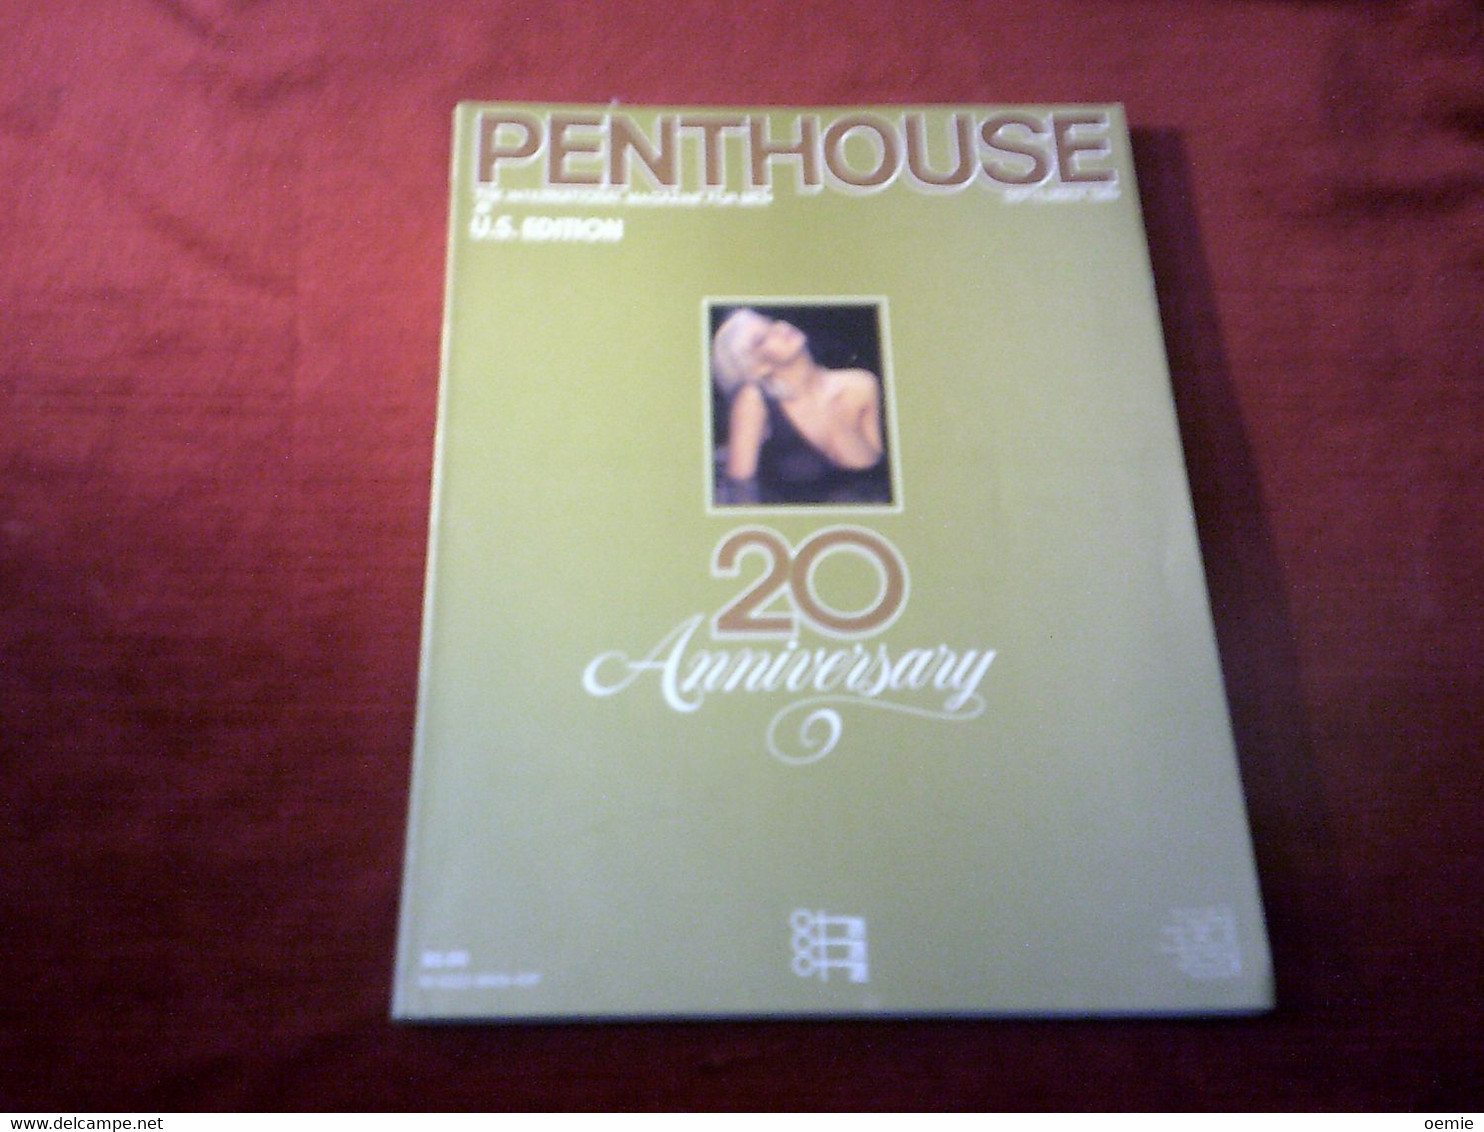 PENTHOUSE  US EDITION SEPTEMBER  20 ANNIVERSARY   AVEV LE POSTER - Per Uomini